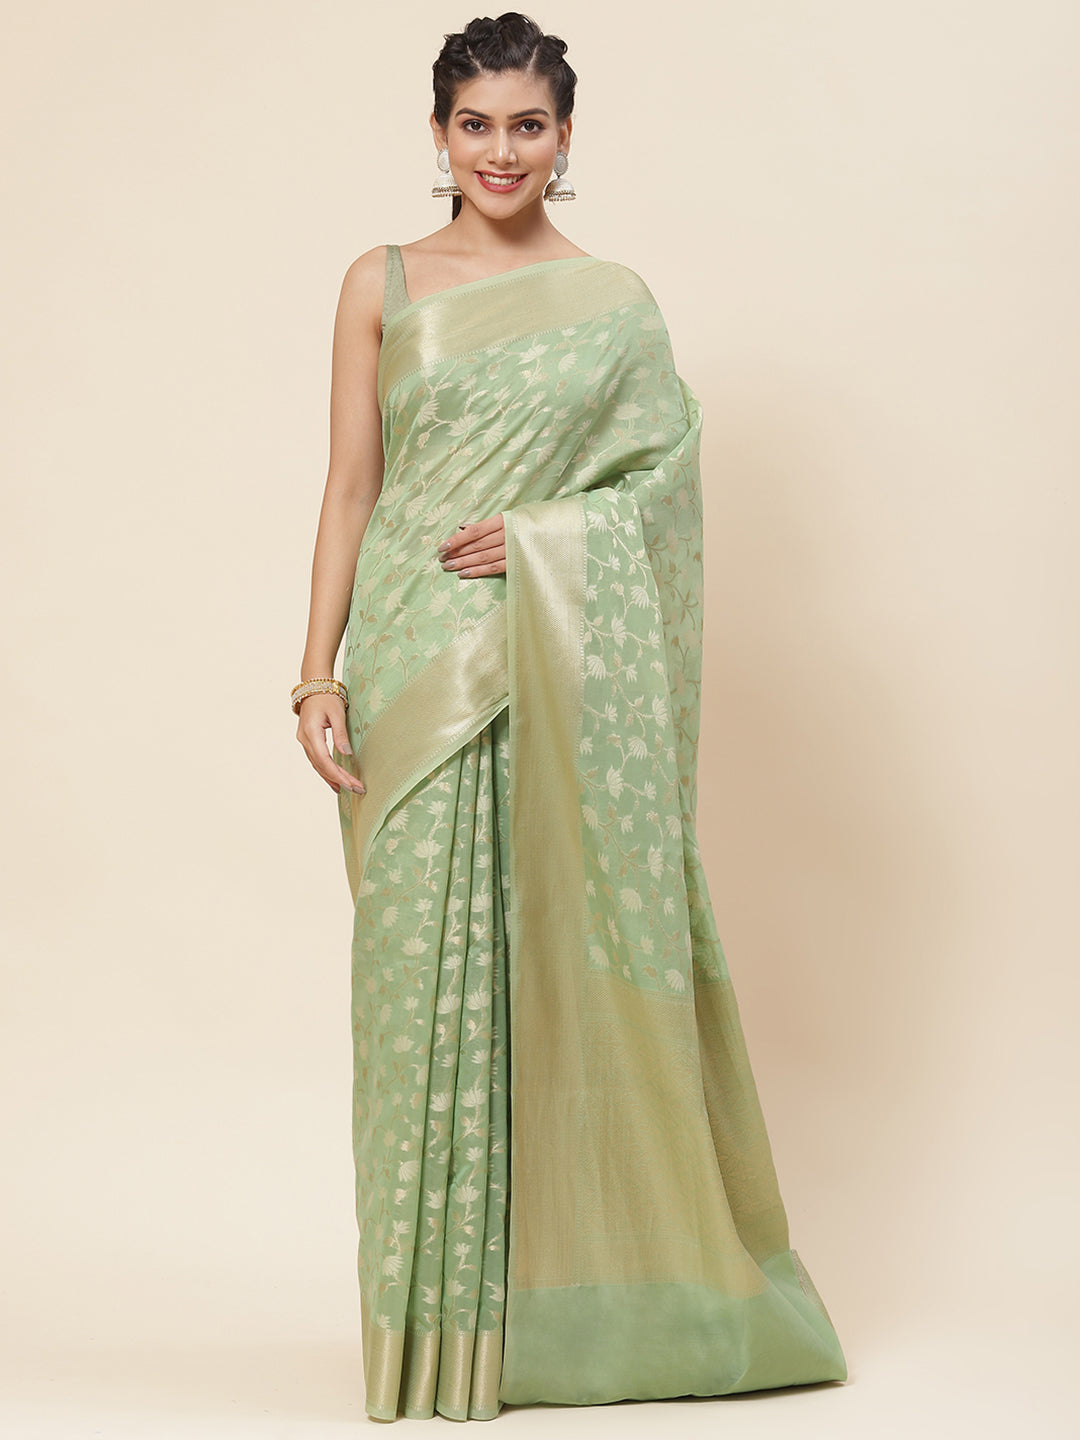 Floral Jaal Woven Cotton Saree